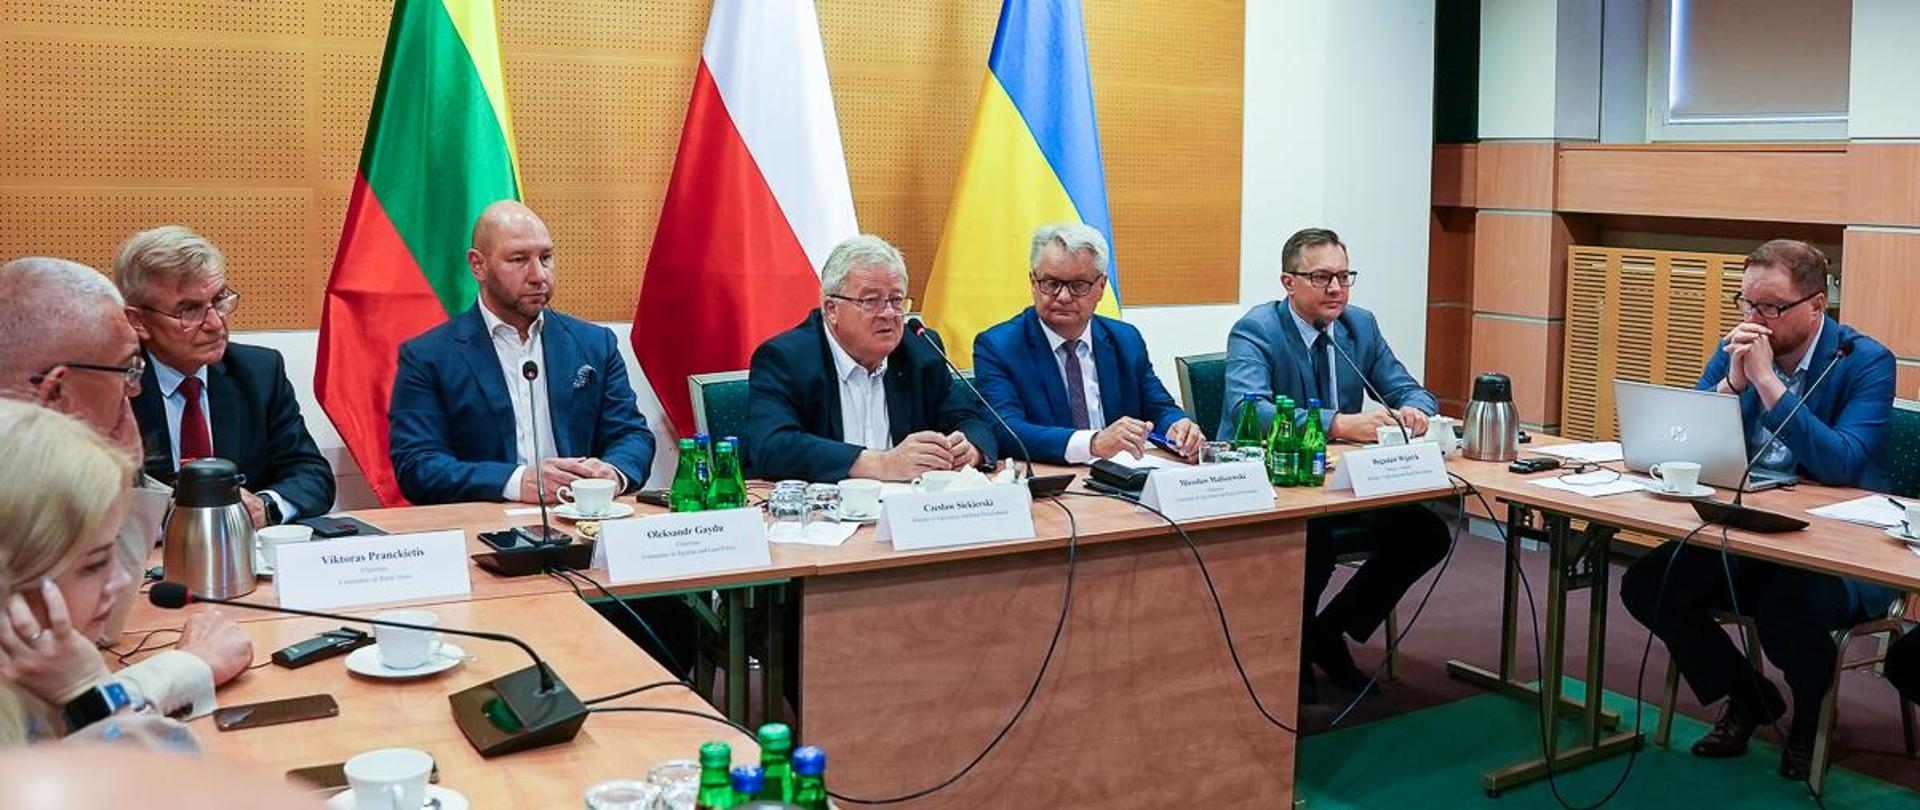 Minister Czesław Siekierski opens the meeting under the Lublin Triangle (photo by the Ministry of Agriculture and Rural Development)